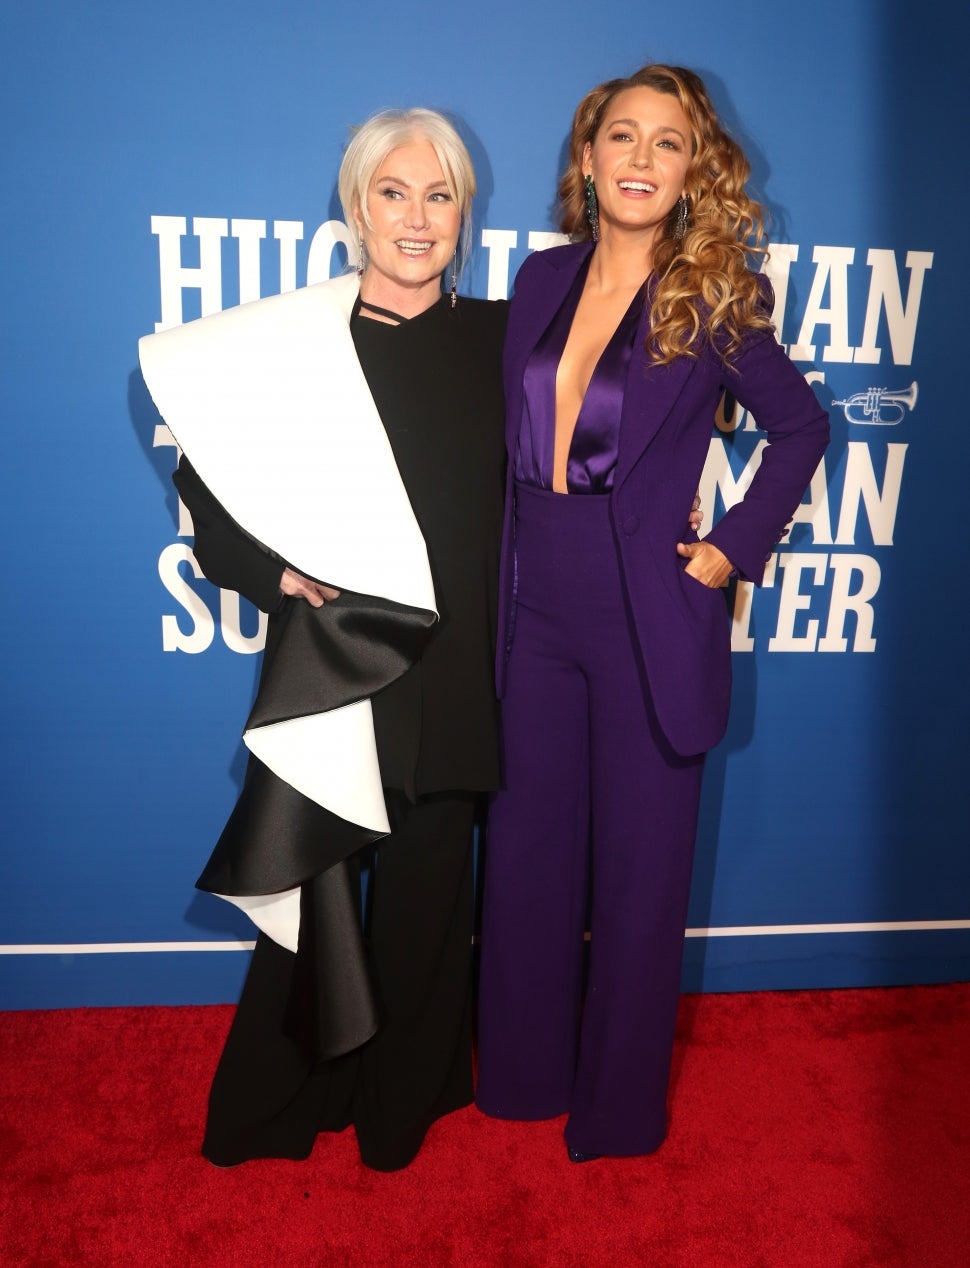 Deborra-Lee Furness and Blake Lively pose at the opening night of "The Music Man" at Winter Garden Theatre on February 10, 2022 in New York City. 